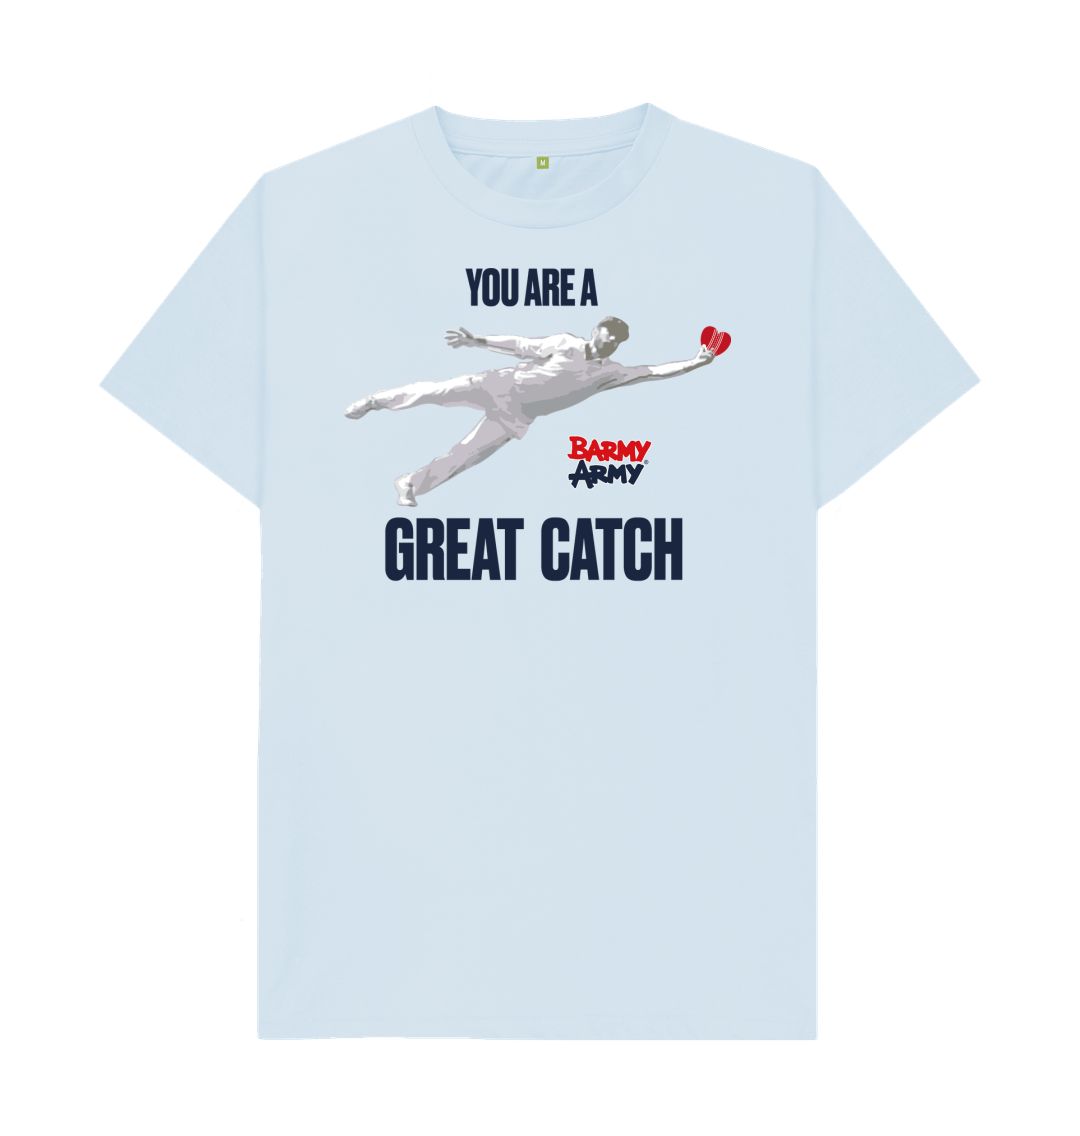 Sky Blue Barmy Army Great Catch Tee - Men's